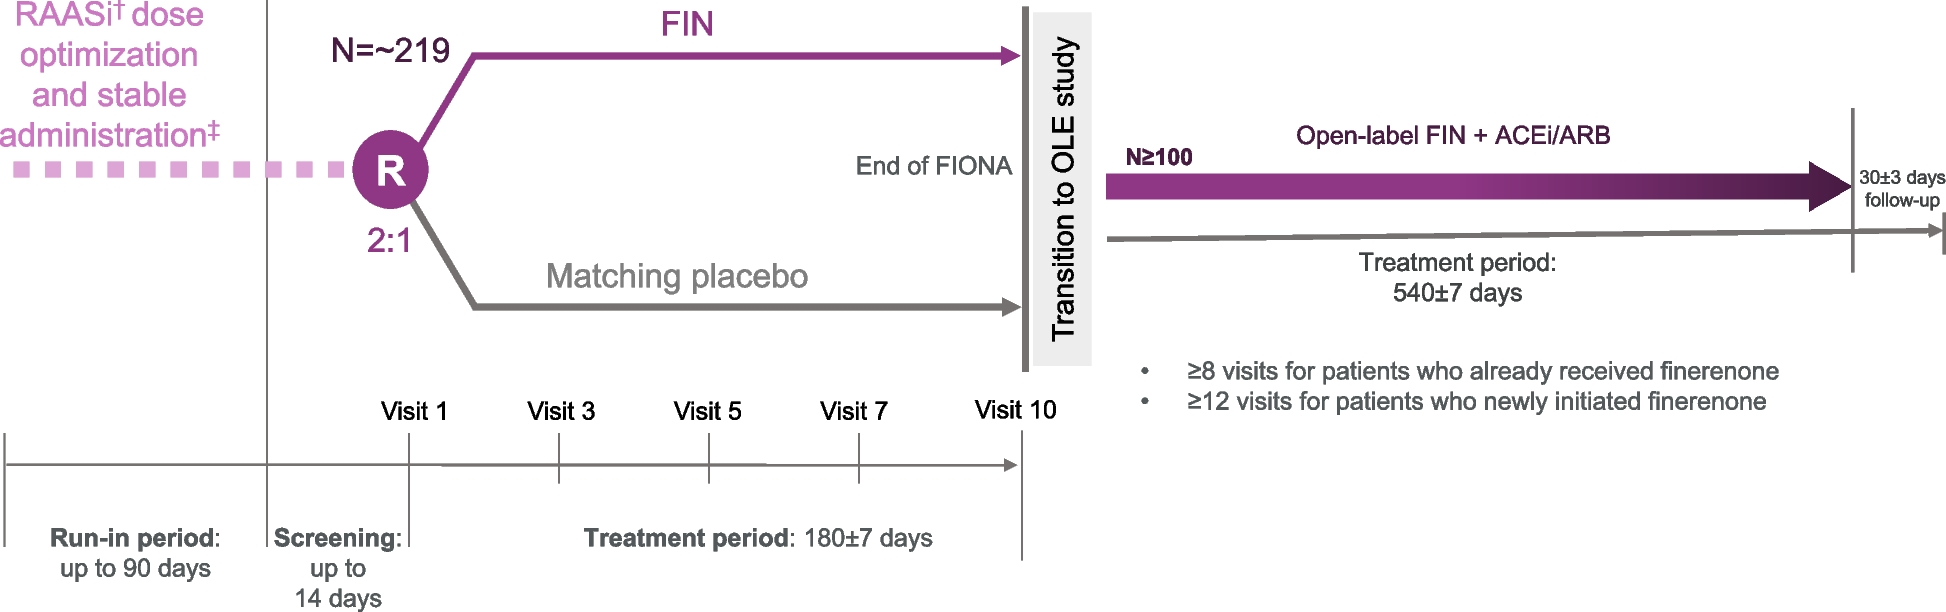 Investigating the use of finerenone in children with chronic kidney disease and proteinuria: design of the FIONA and open-label extension studies